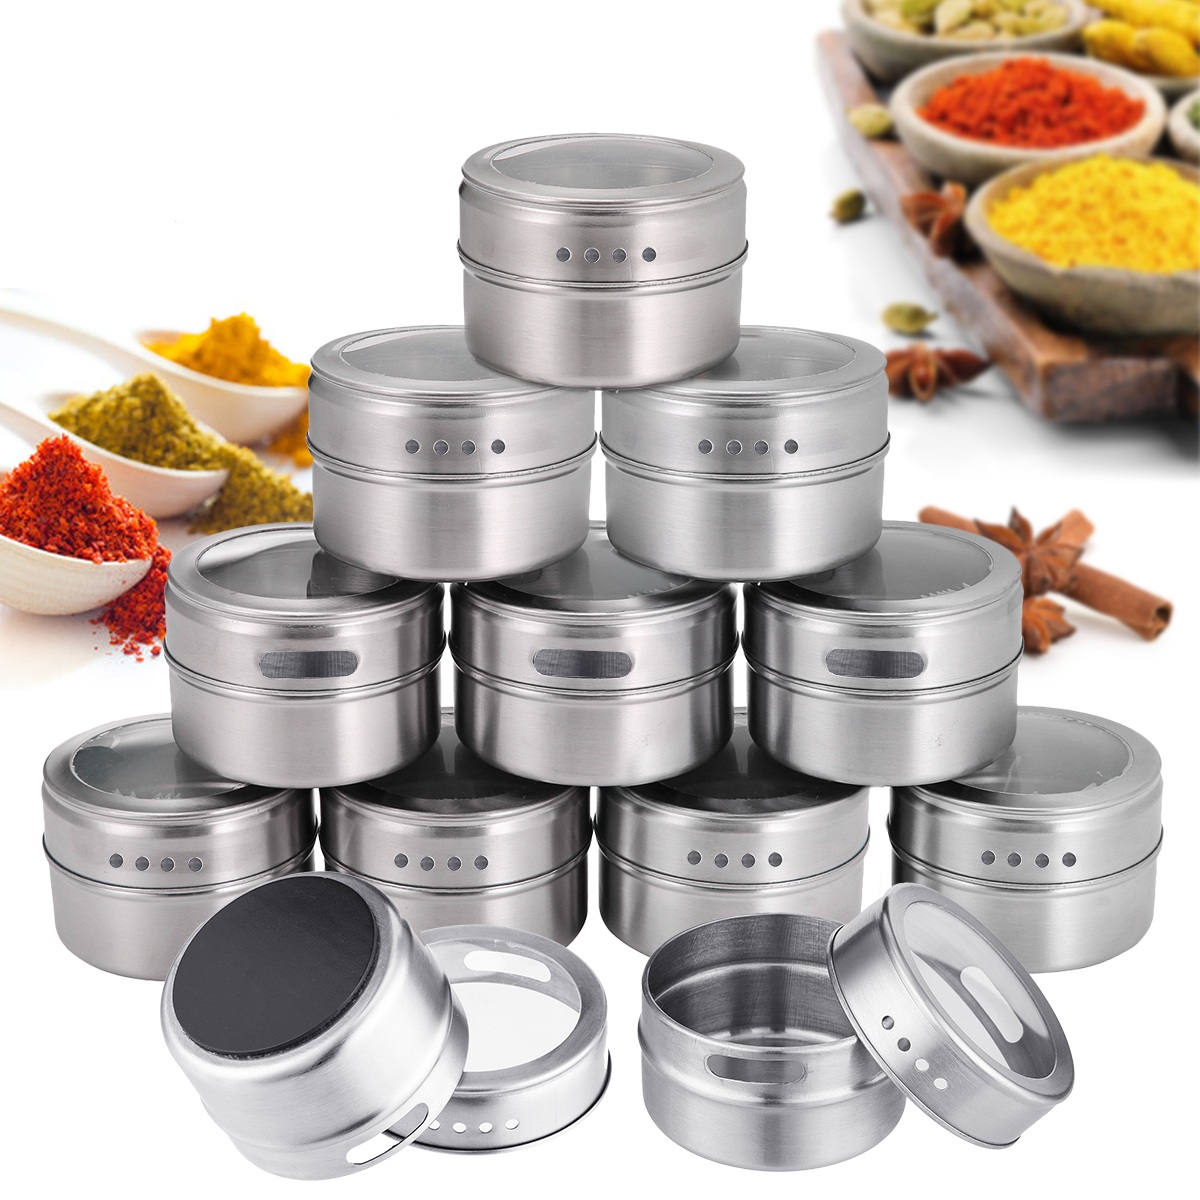 

12Pcs/Set Magnetic Spice Tins Round Spice Container Spice Storage Boxes Magnetic Spice Jars for Kitchen Storage Containe